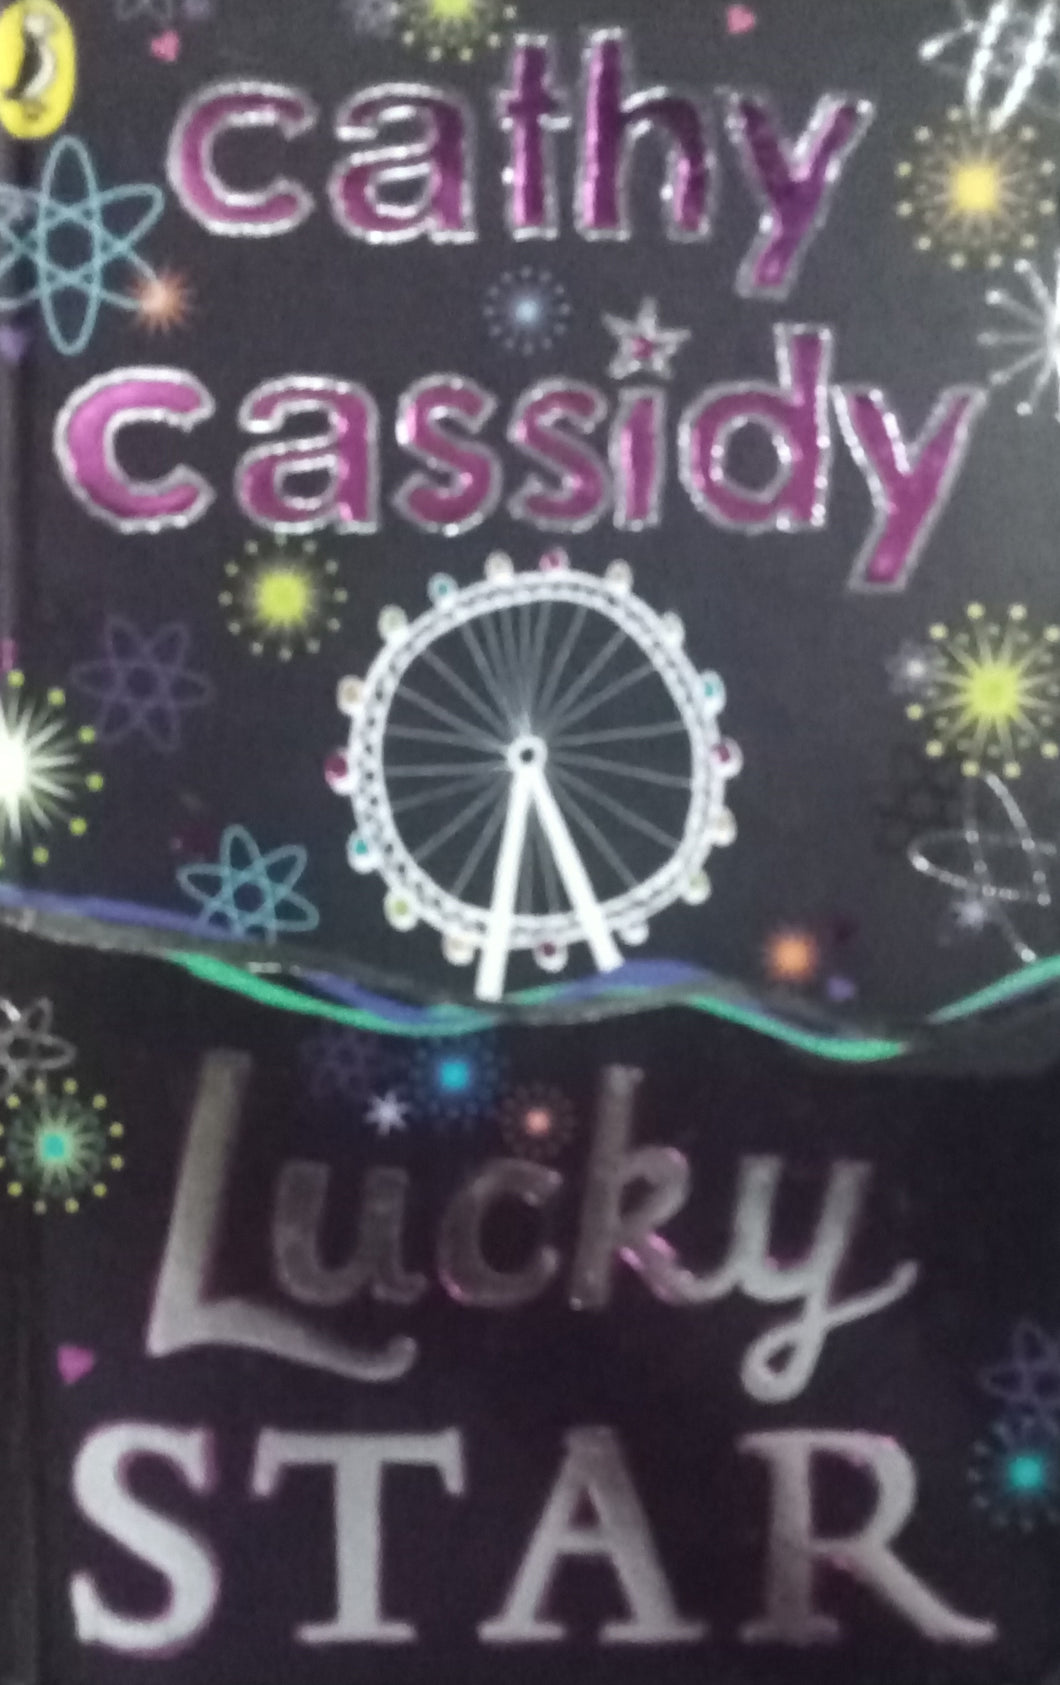 Lucky Star by Cathy Cassidy